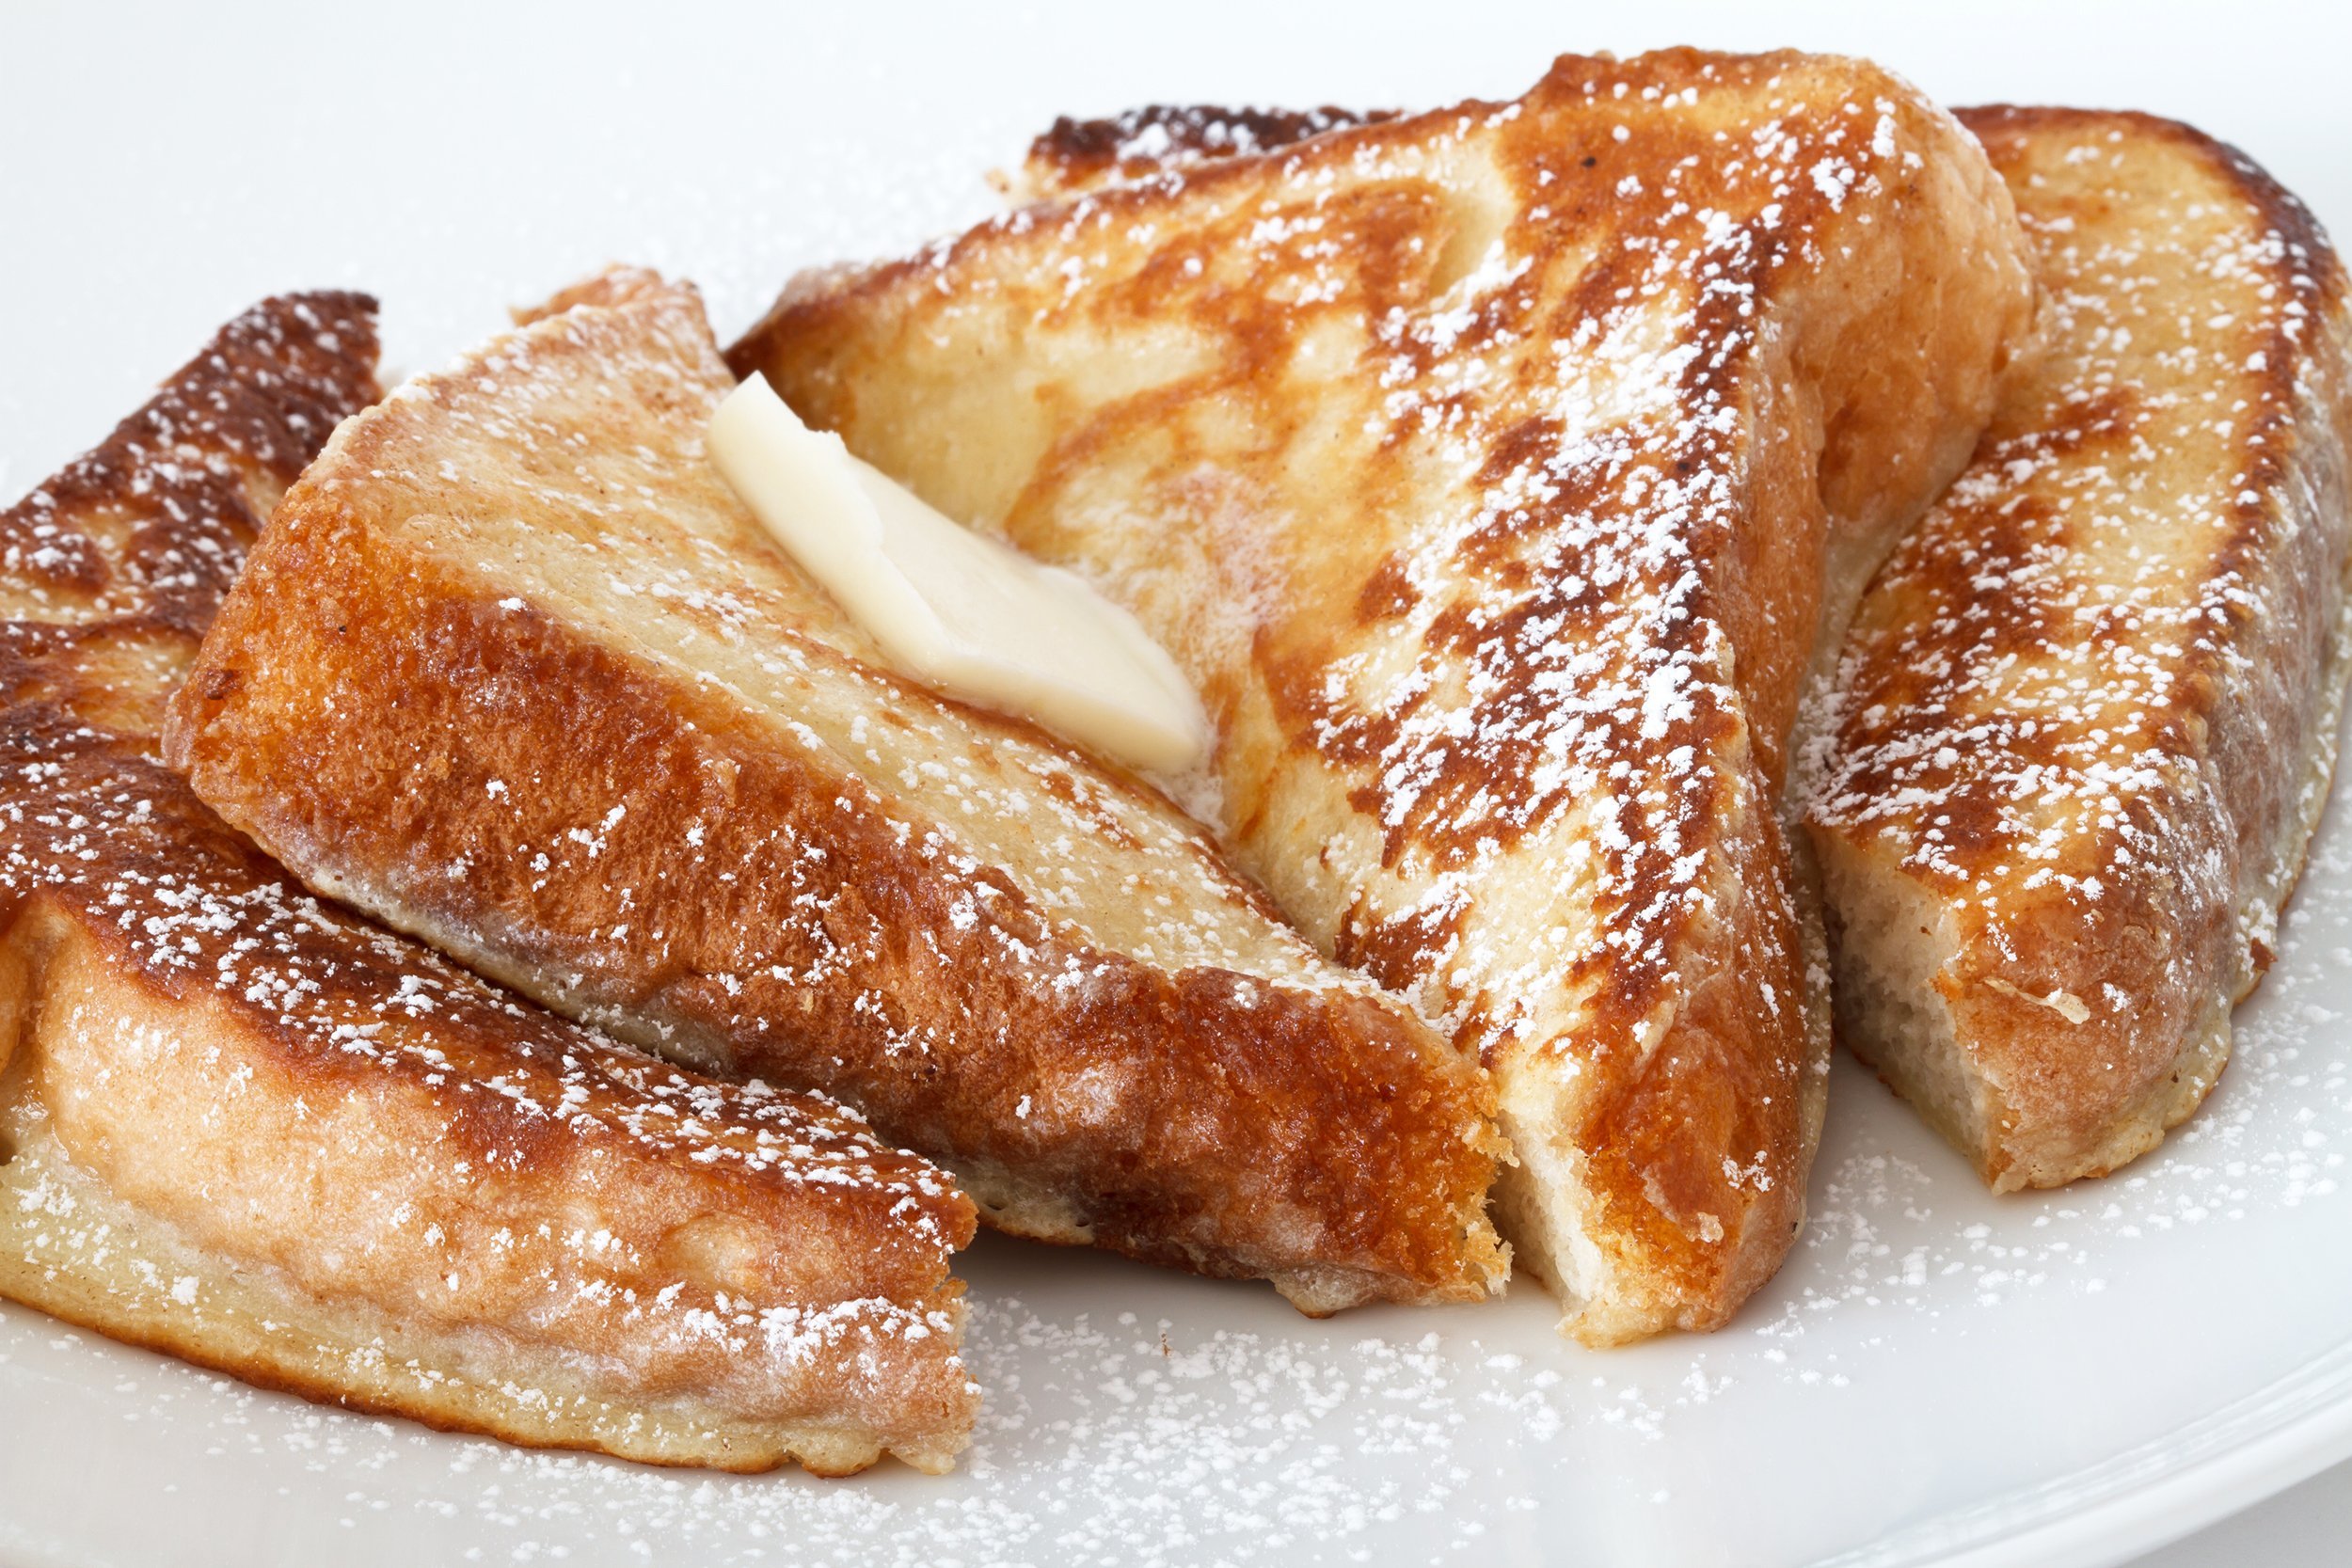 <p>There are many ways to make French toast, but the basic idea is to mix eight eggs and one-third cup of milk in a bowl — spices such as nutmeg are optional — and soak slices of bread in it that can be heated until golden brown on a lightly greased, large nonstick skillet over high heat. Don't forget to preheat, and to let the bread stand a bit before going on the skillet for two to three minutes per side. Any bread will work, including slightly stale bread, and you can get creative with mix-ins and toppings.</p>